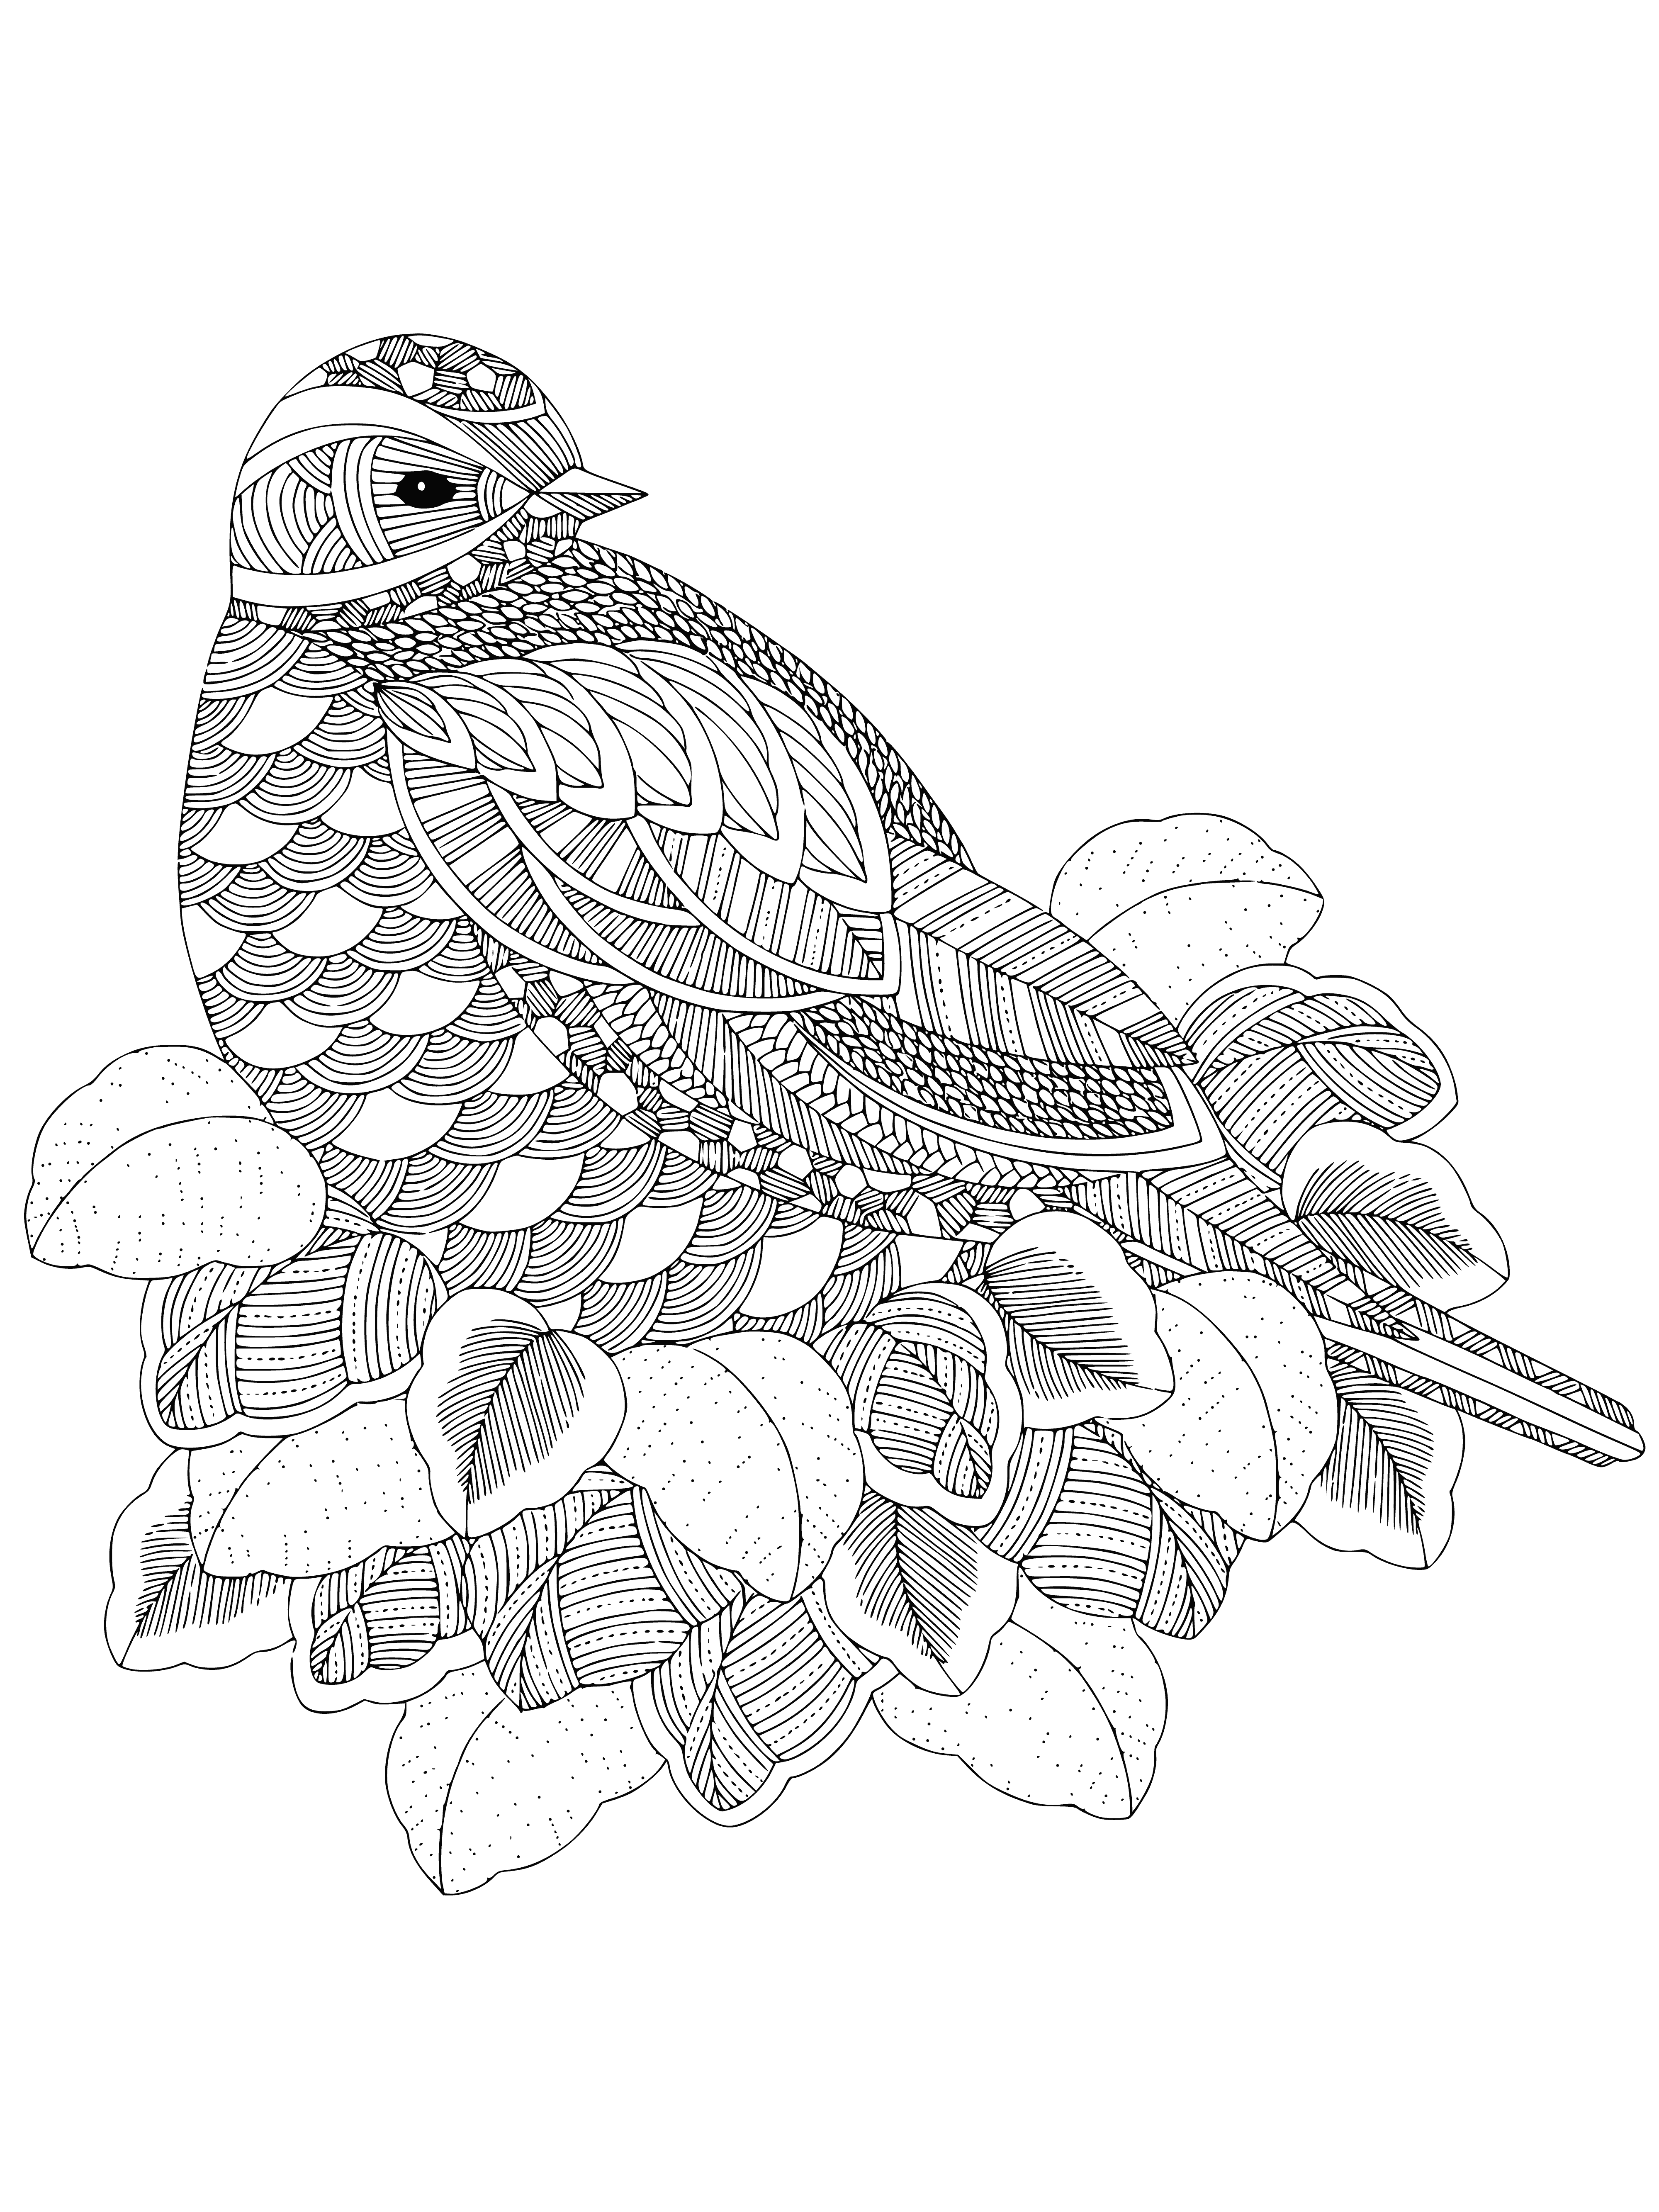 coloring page: Bird joyfully sings, perched on its brown branch with brown & white feathers.